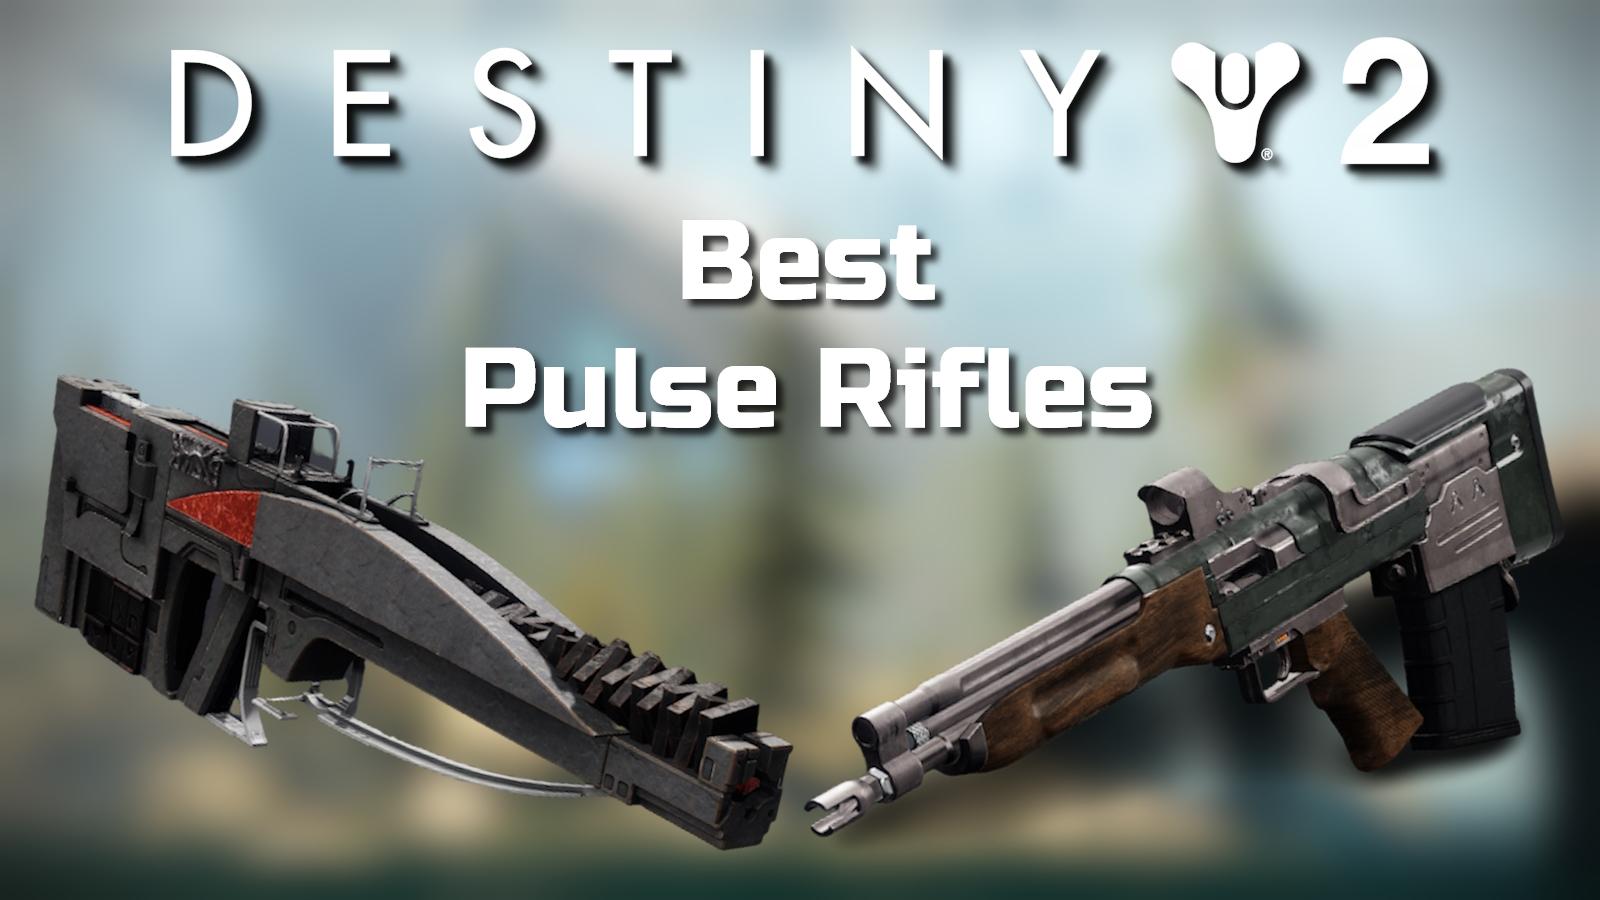 The best Pulse Rifles to use in Destiny 2, with Battle Scar and Insidious